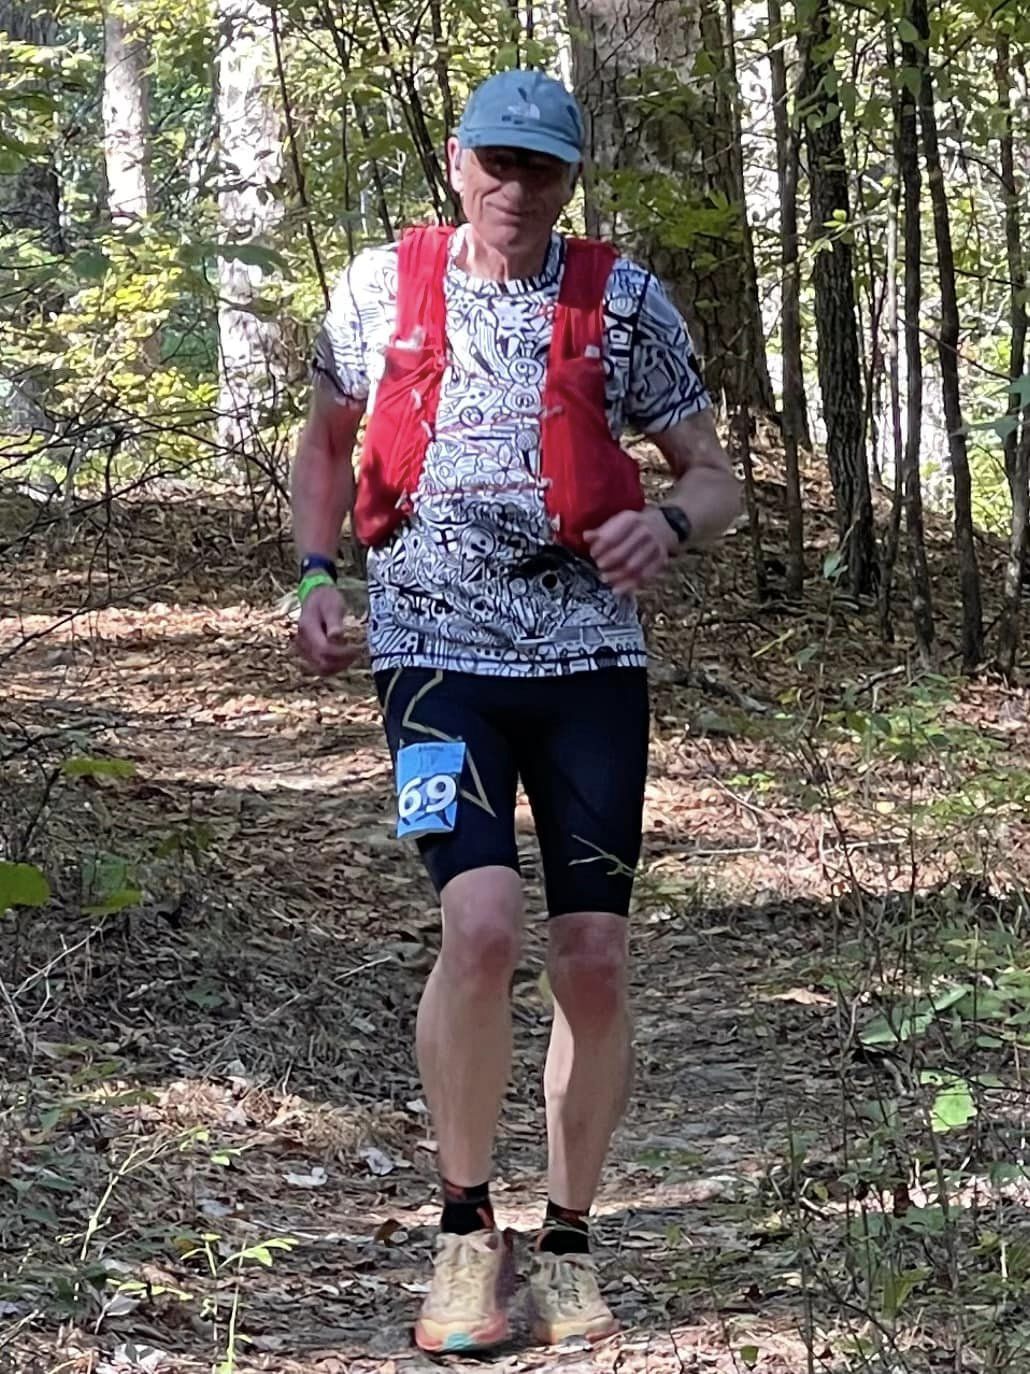 Ultra-runner, 69, going the distance in impressive style with CurraNZ